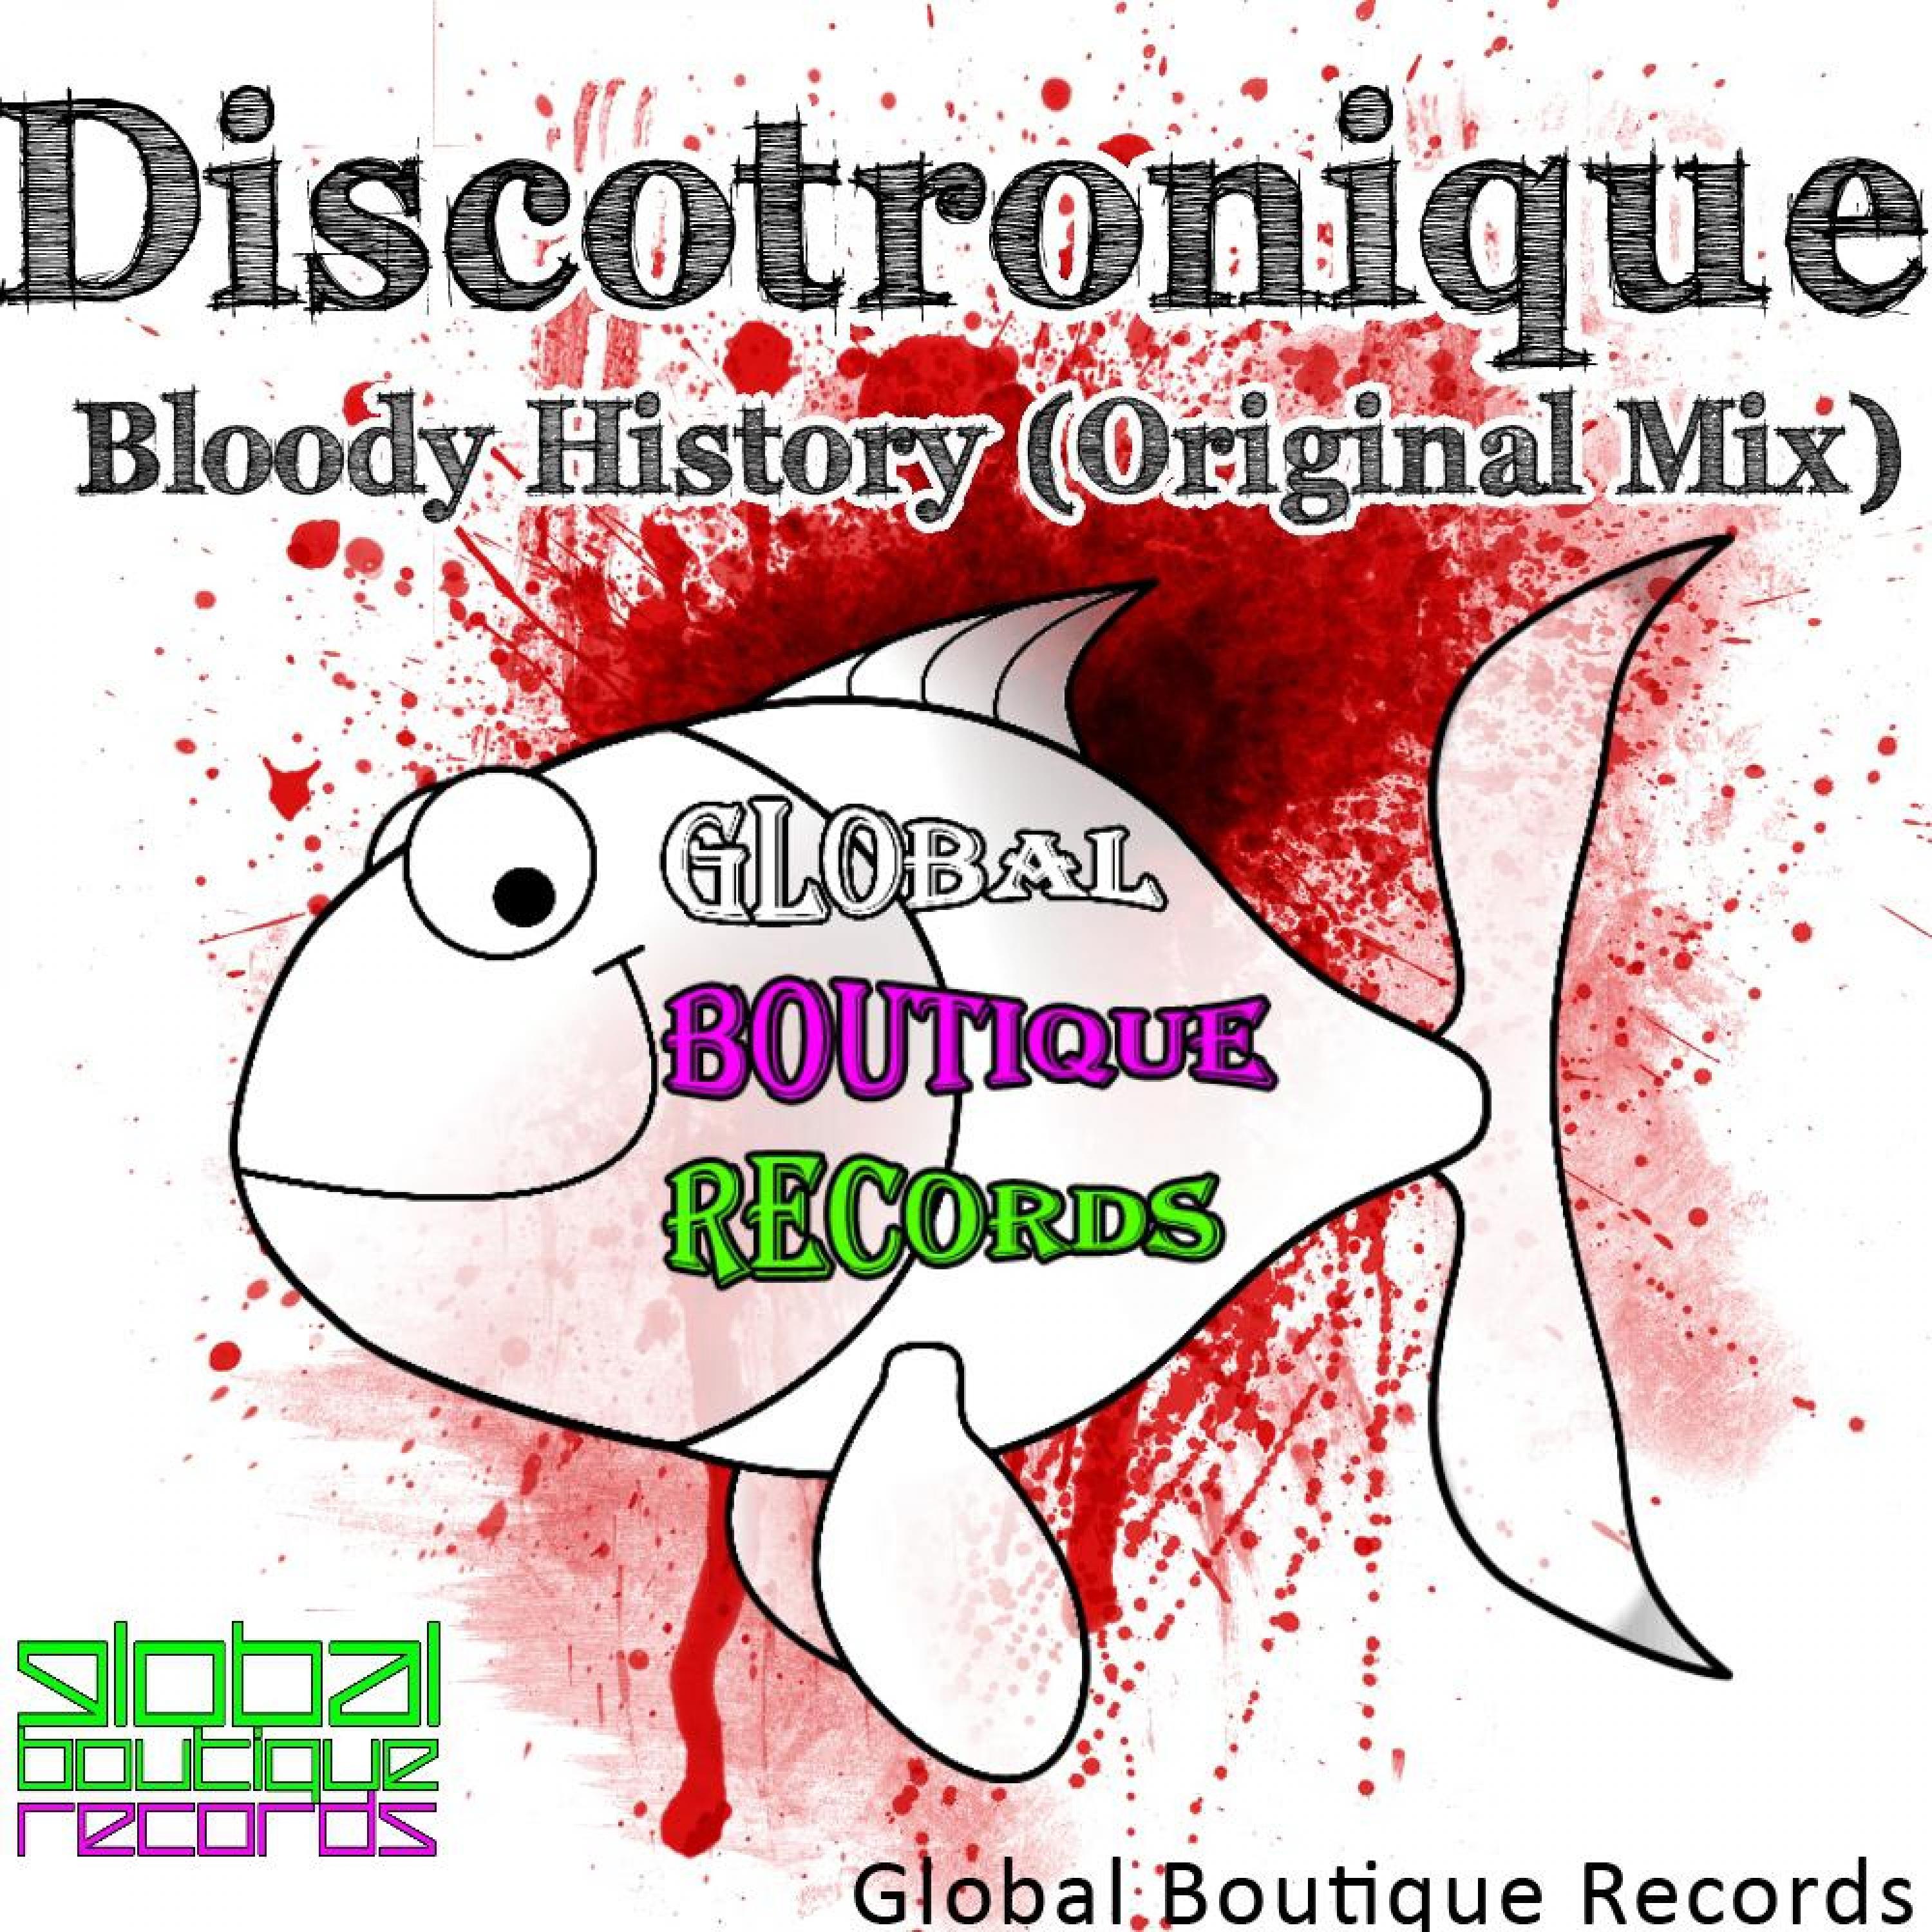 Discotronique - Bloody History